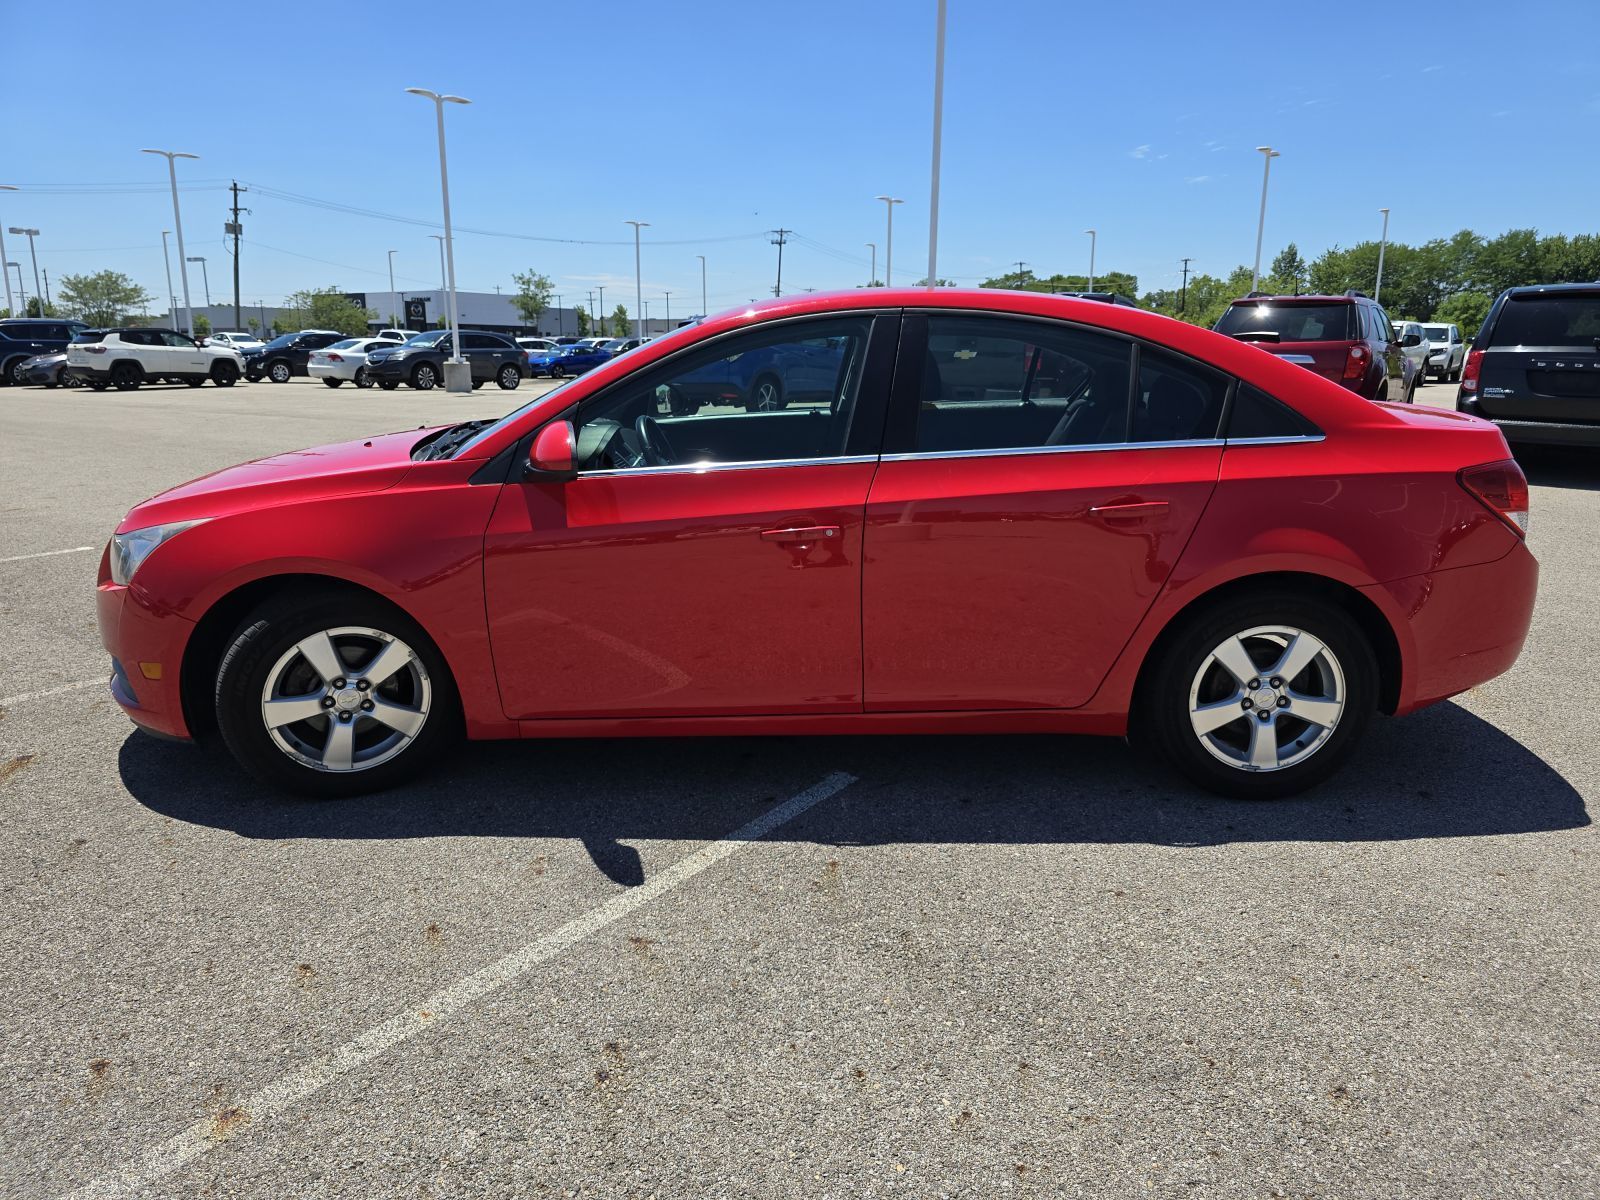 Used, 2014 Chevrolet Cruze 1LT, Red, P0637-11